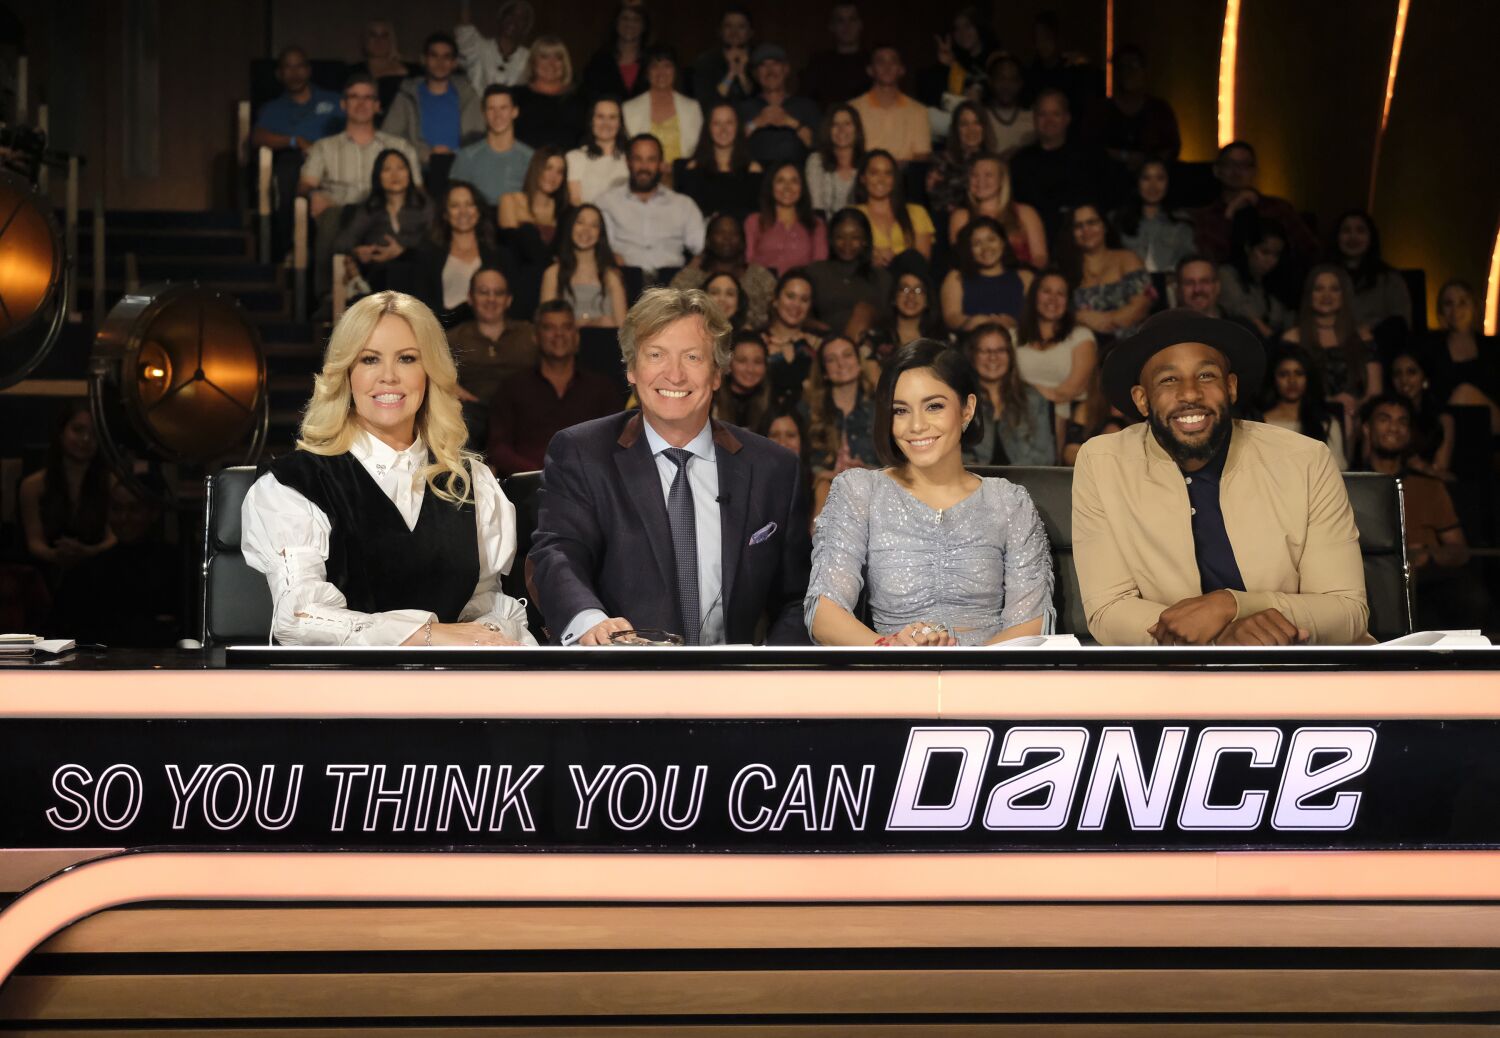 'So You Think You Can Dance' judge remembers Stephen 'Twitch' Boss' solo routine: 'It was a defining moment'